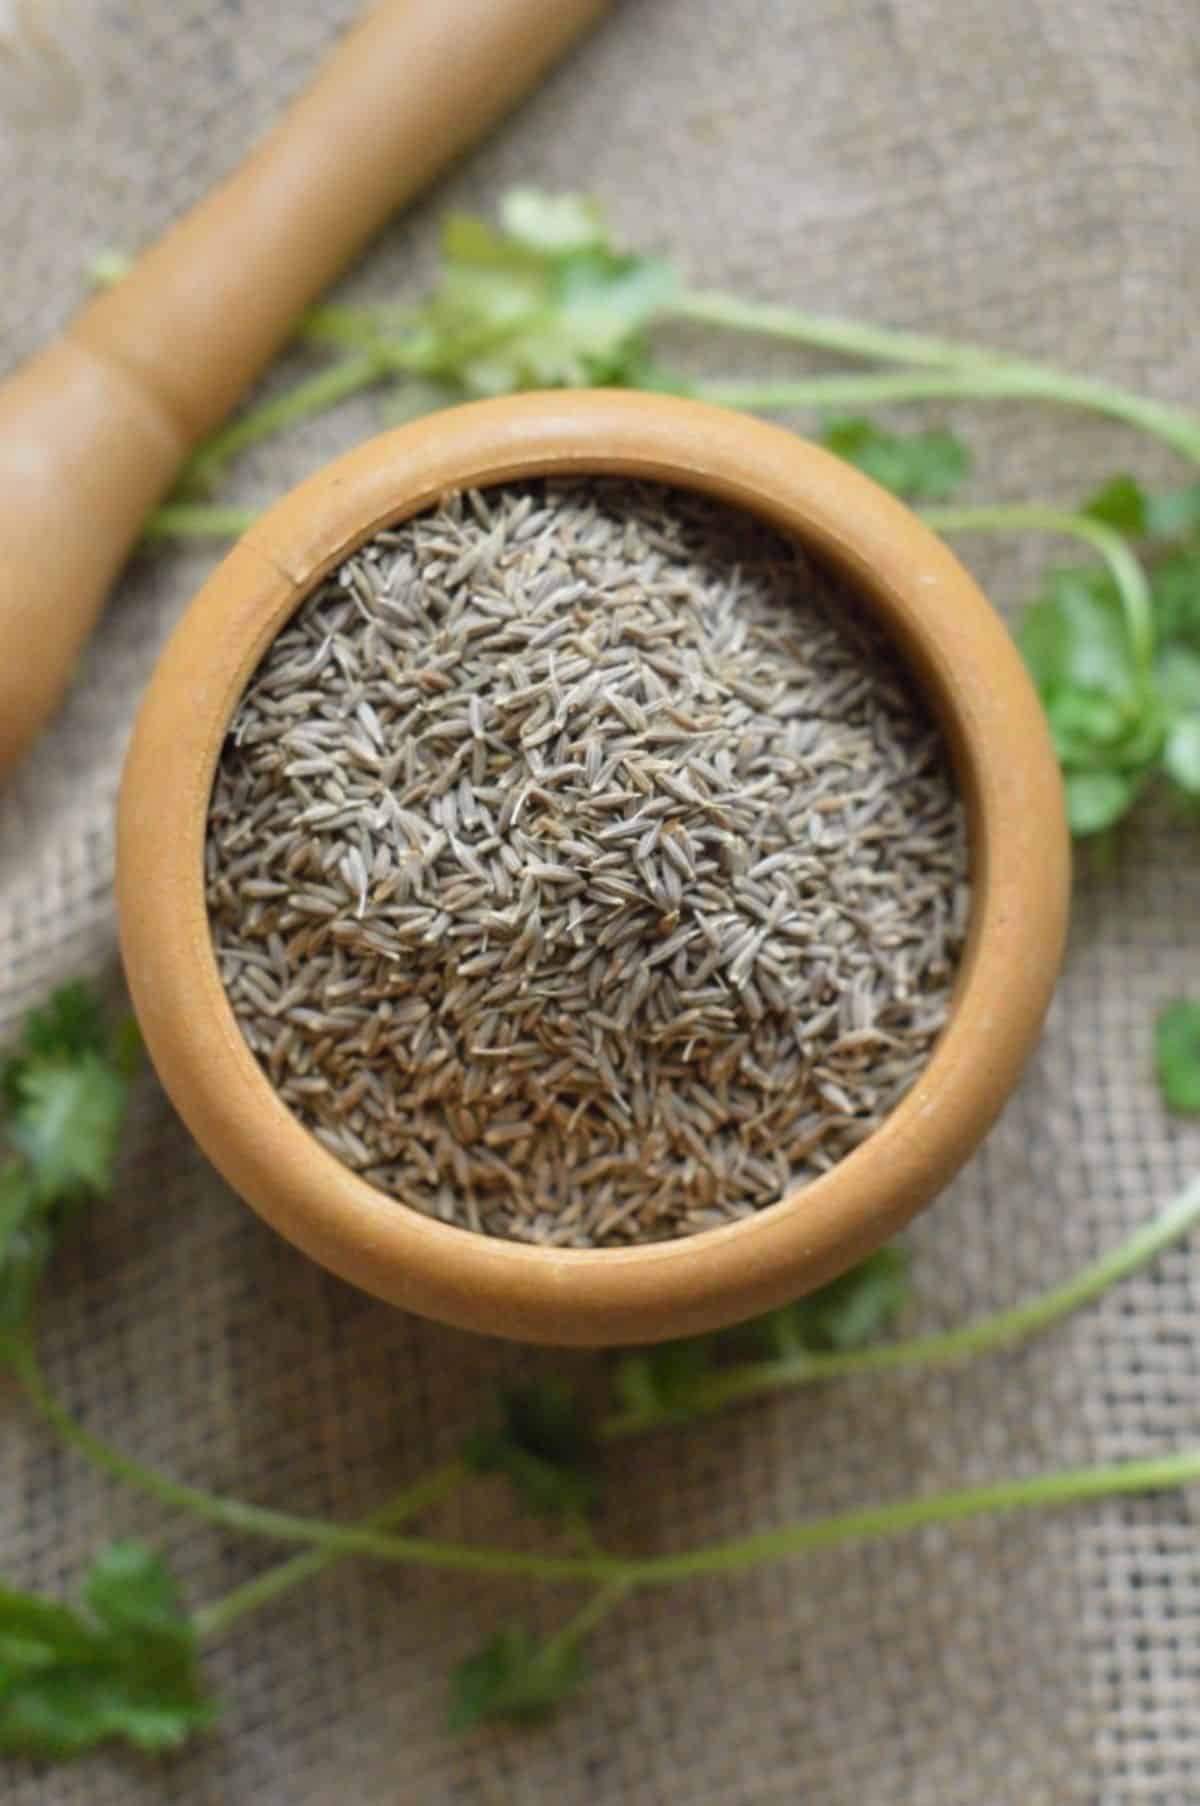 Dried cumin seeds in a brown bowl.